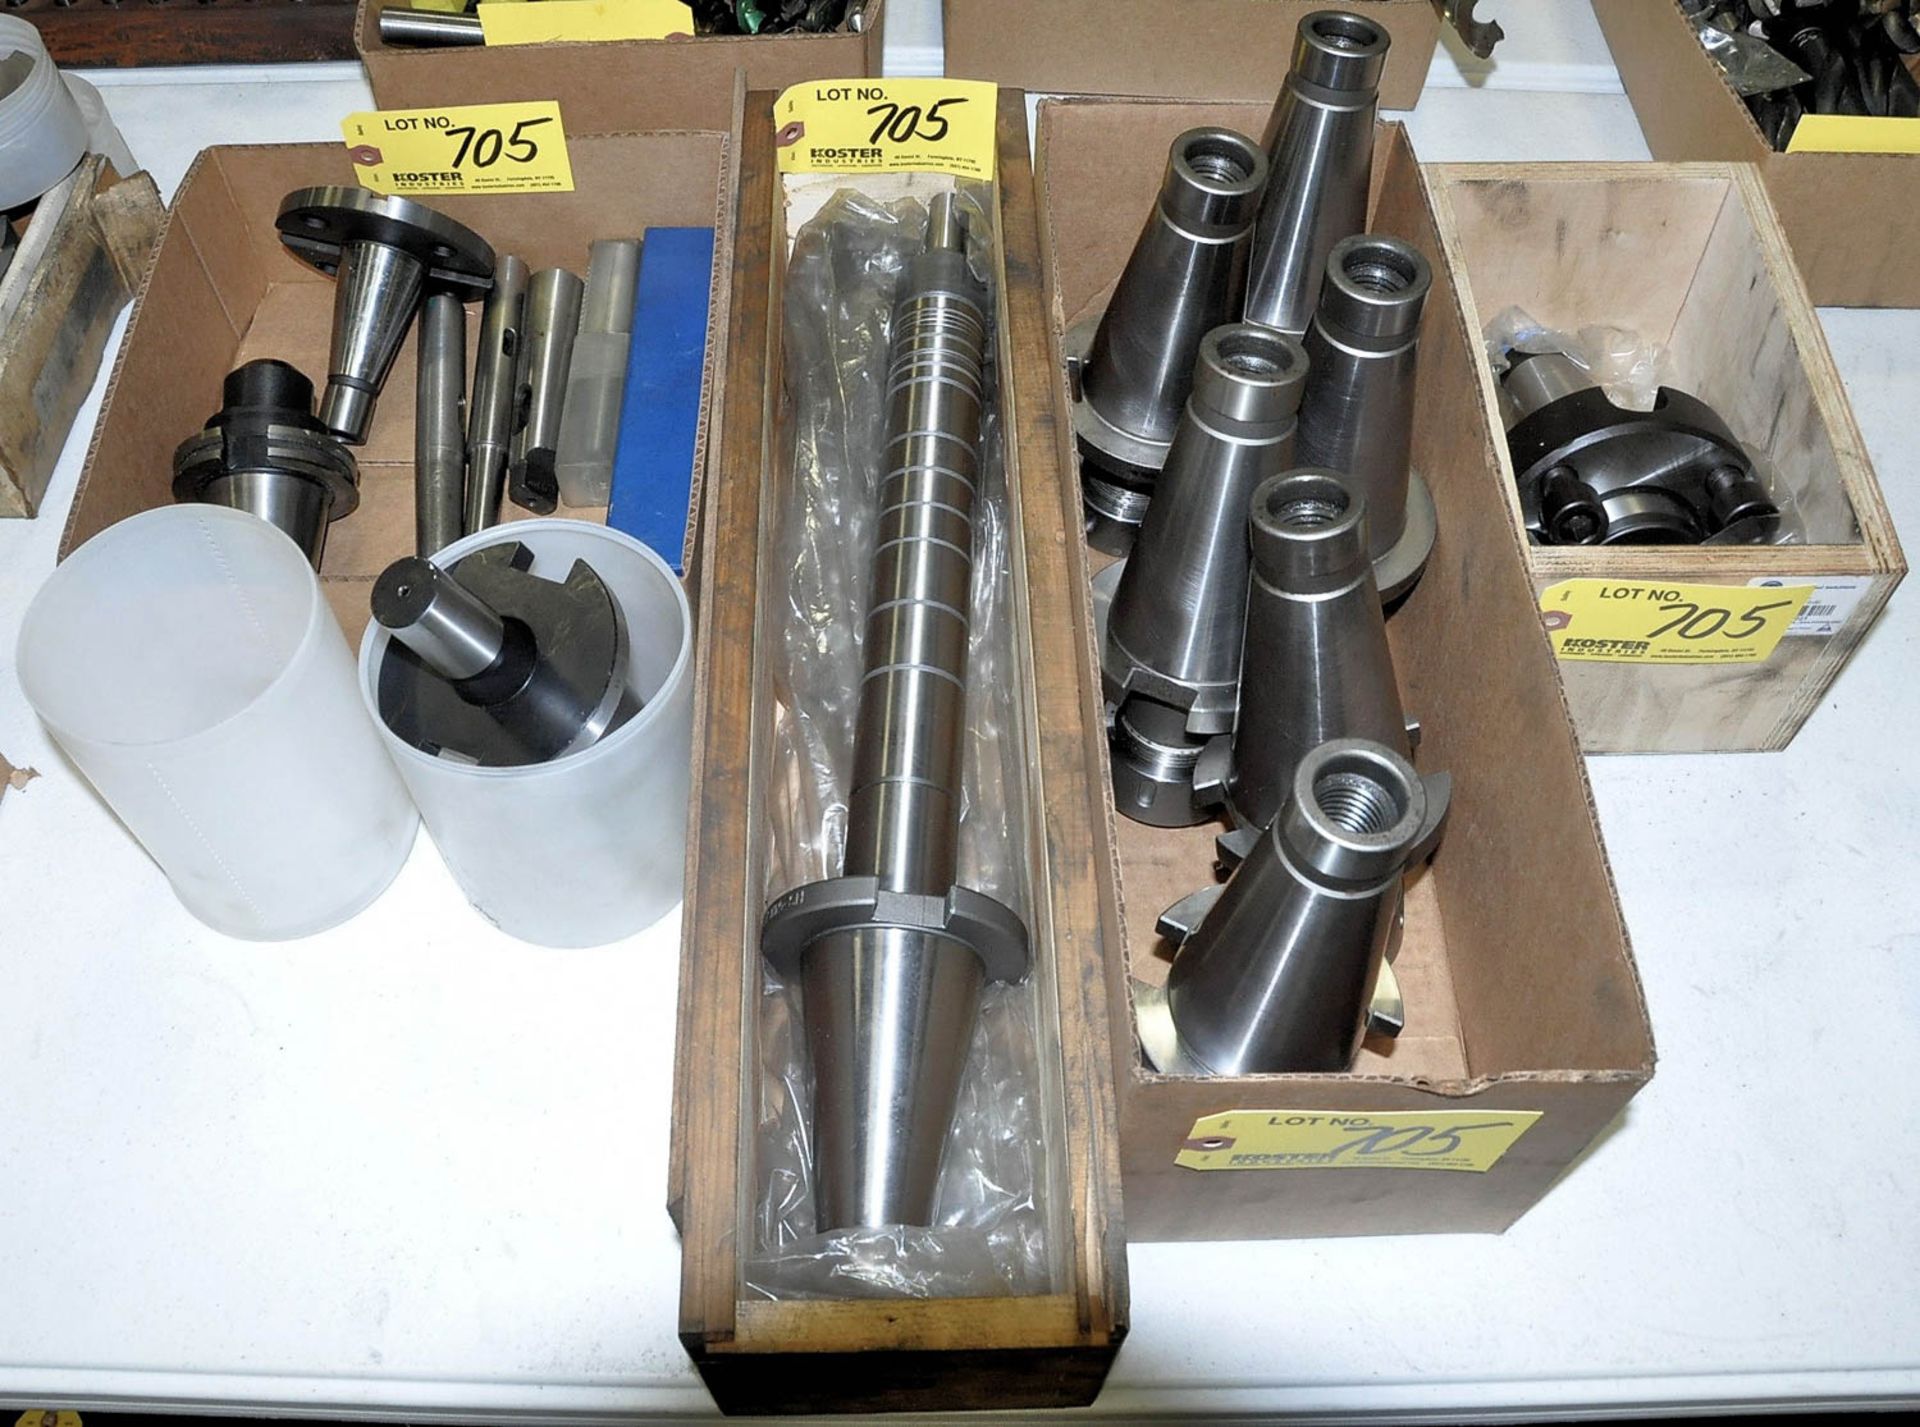 New 50 Taper Tool Holders in (4) Boxes